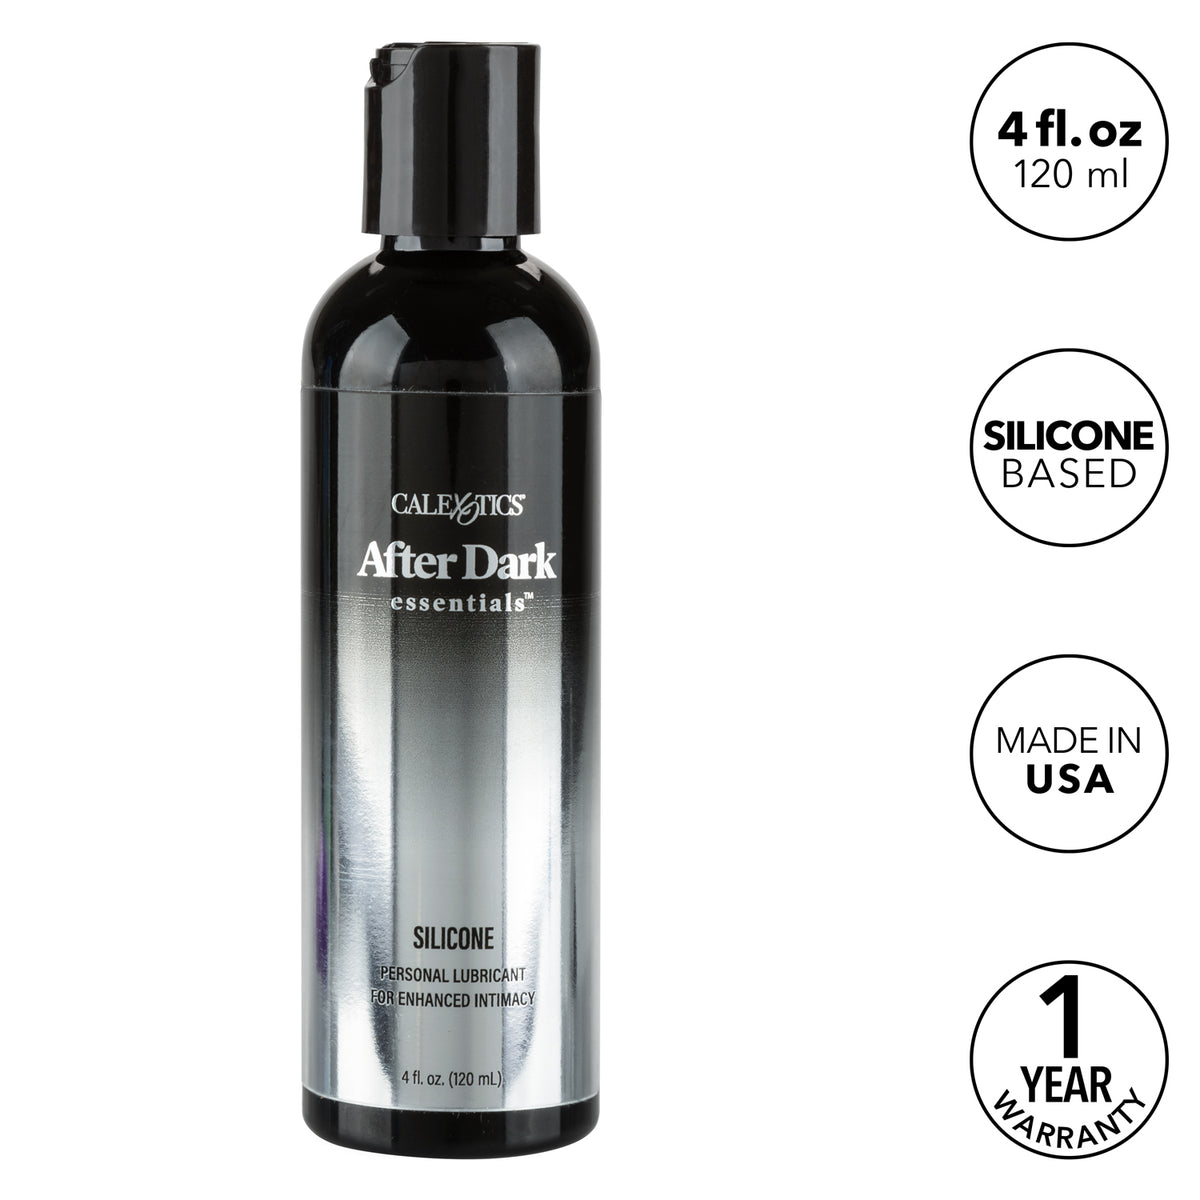 After Dark Essentials™ Silicone-Based Personal Lubricant